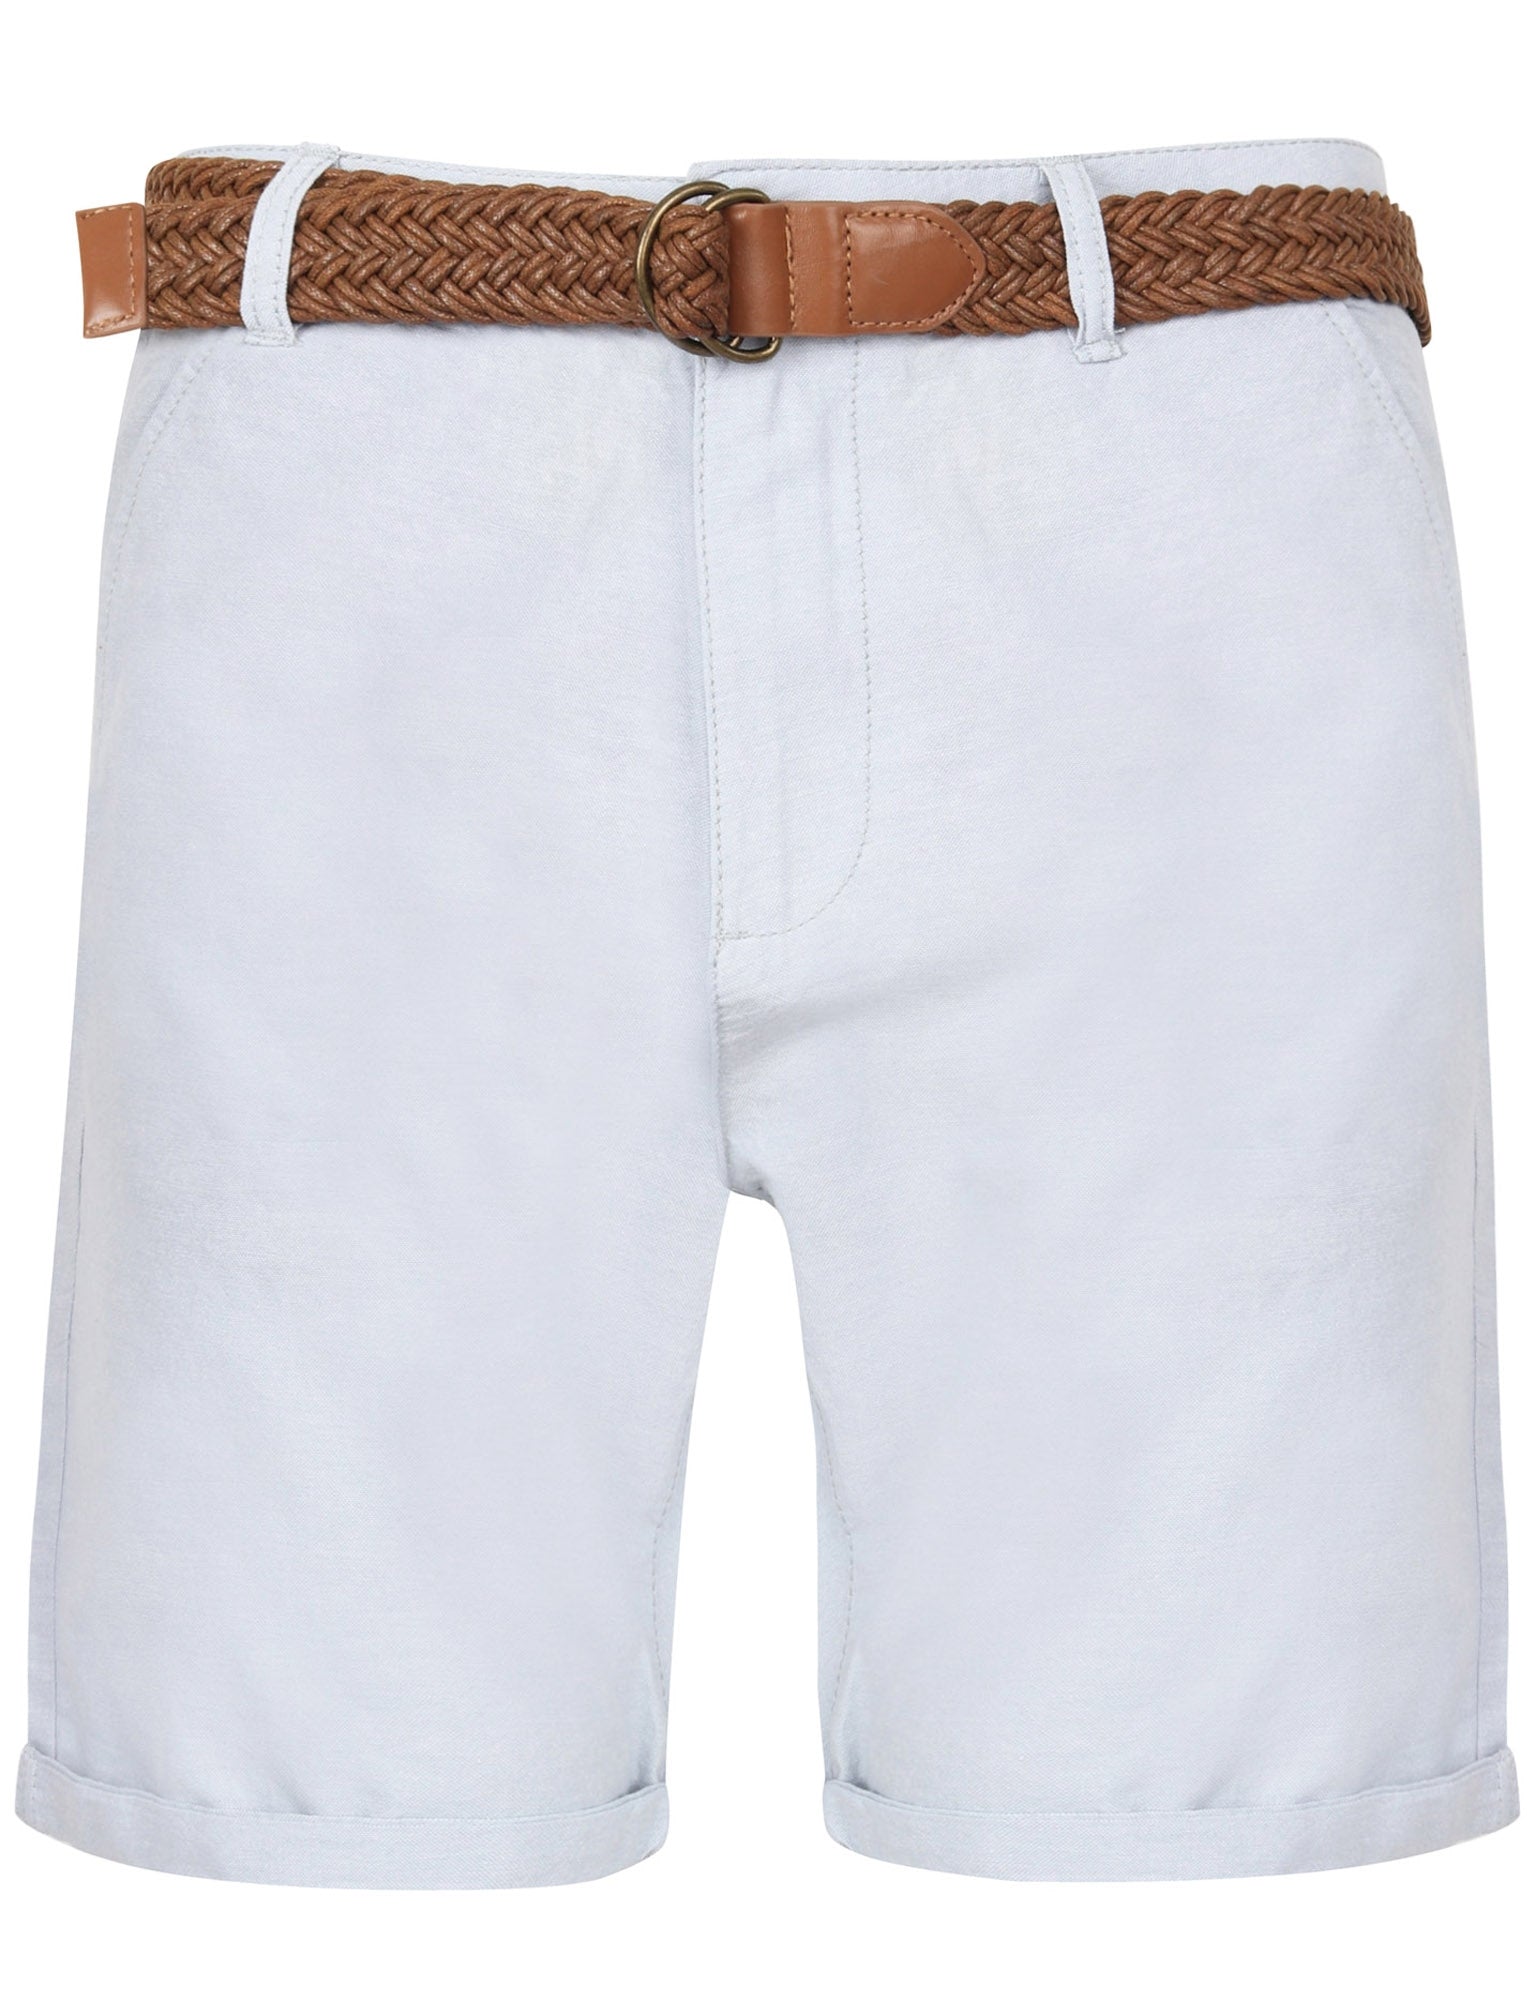 Shorts Kari Cotton Chino Shorts with Woven Belt in Blue Fog - Tokyo Laundry / S - Tokyo Laundry